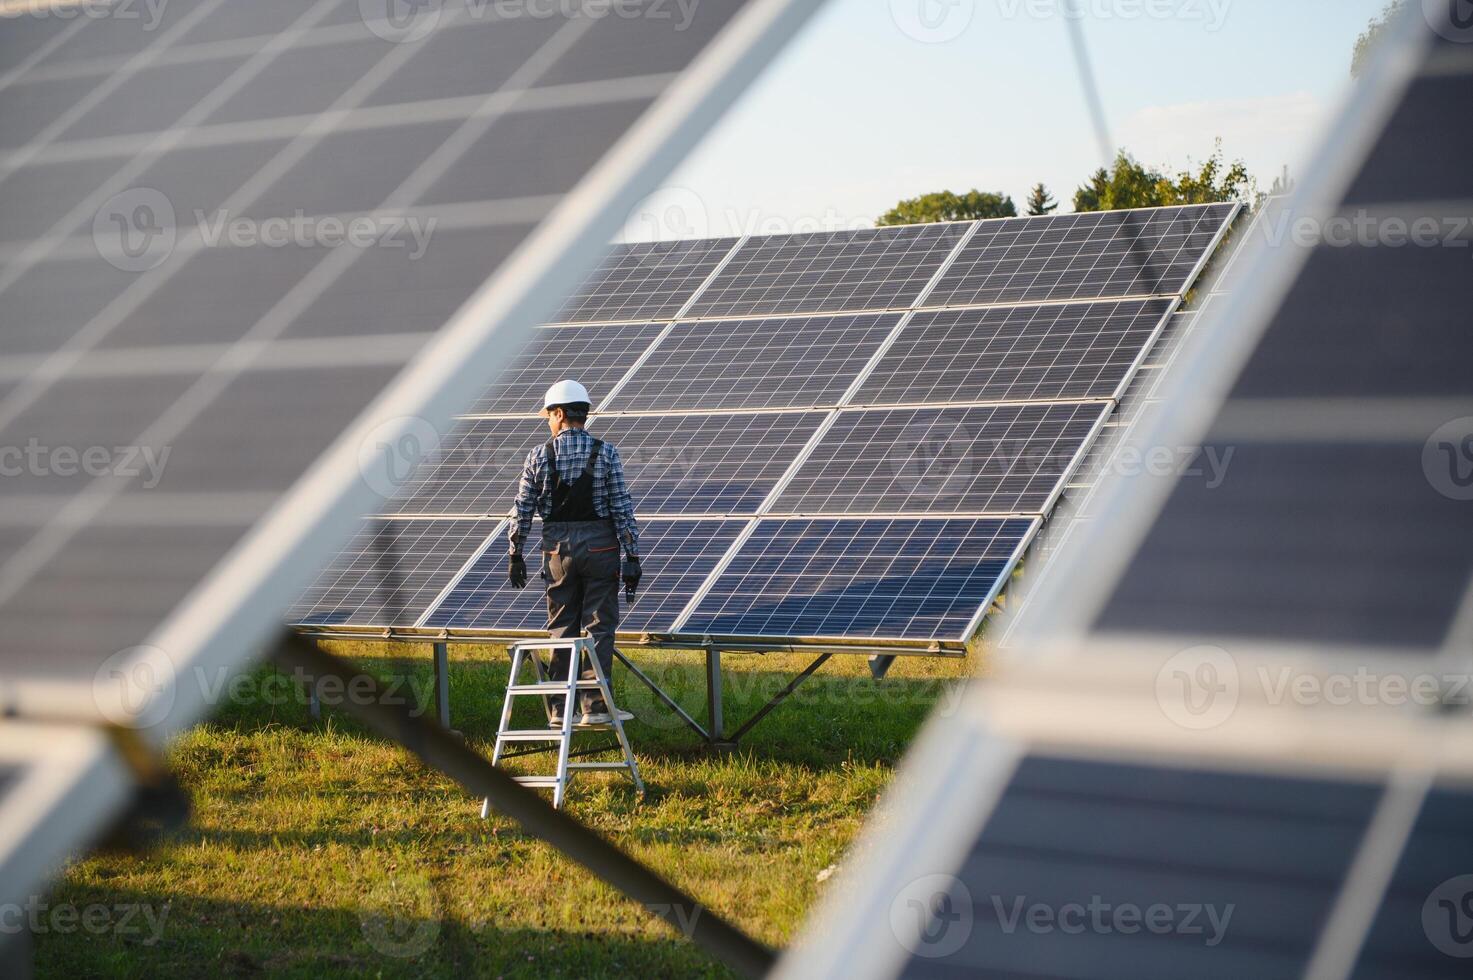 An Indian male worker is working on installing solar panels in a field photo